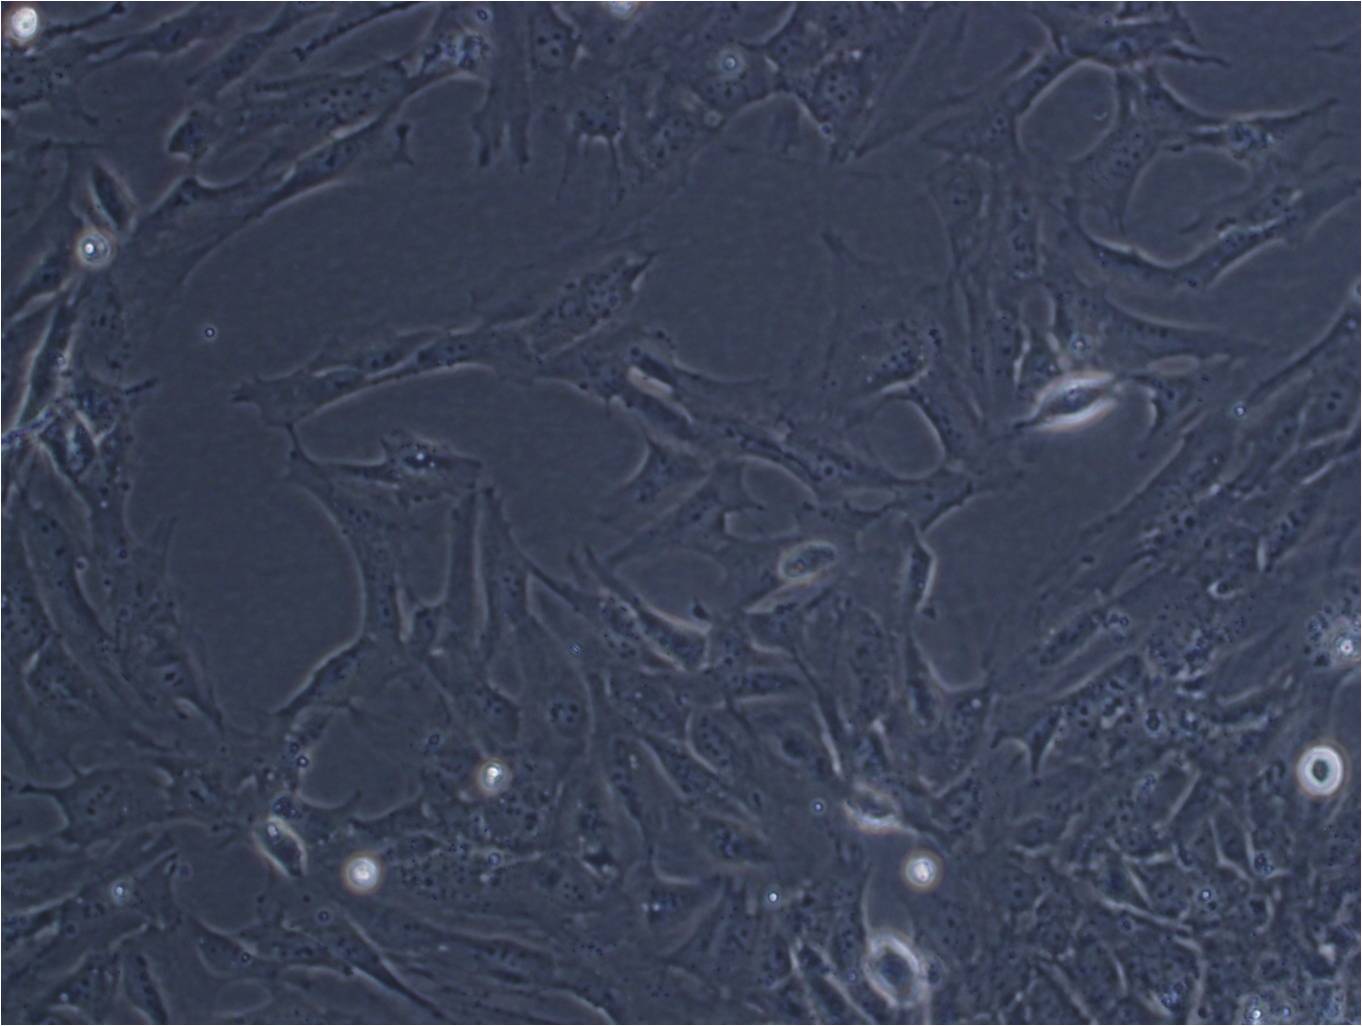 LC-2/ad epithelioid cells人肺癌腺癌细胞系,LC-2/ad epithelioid cells